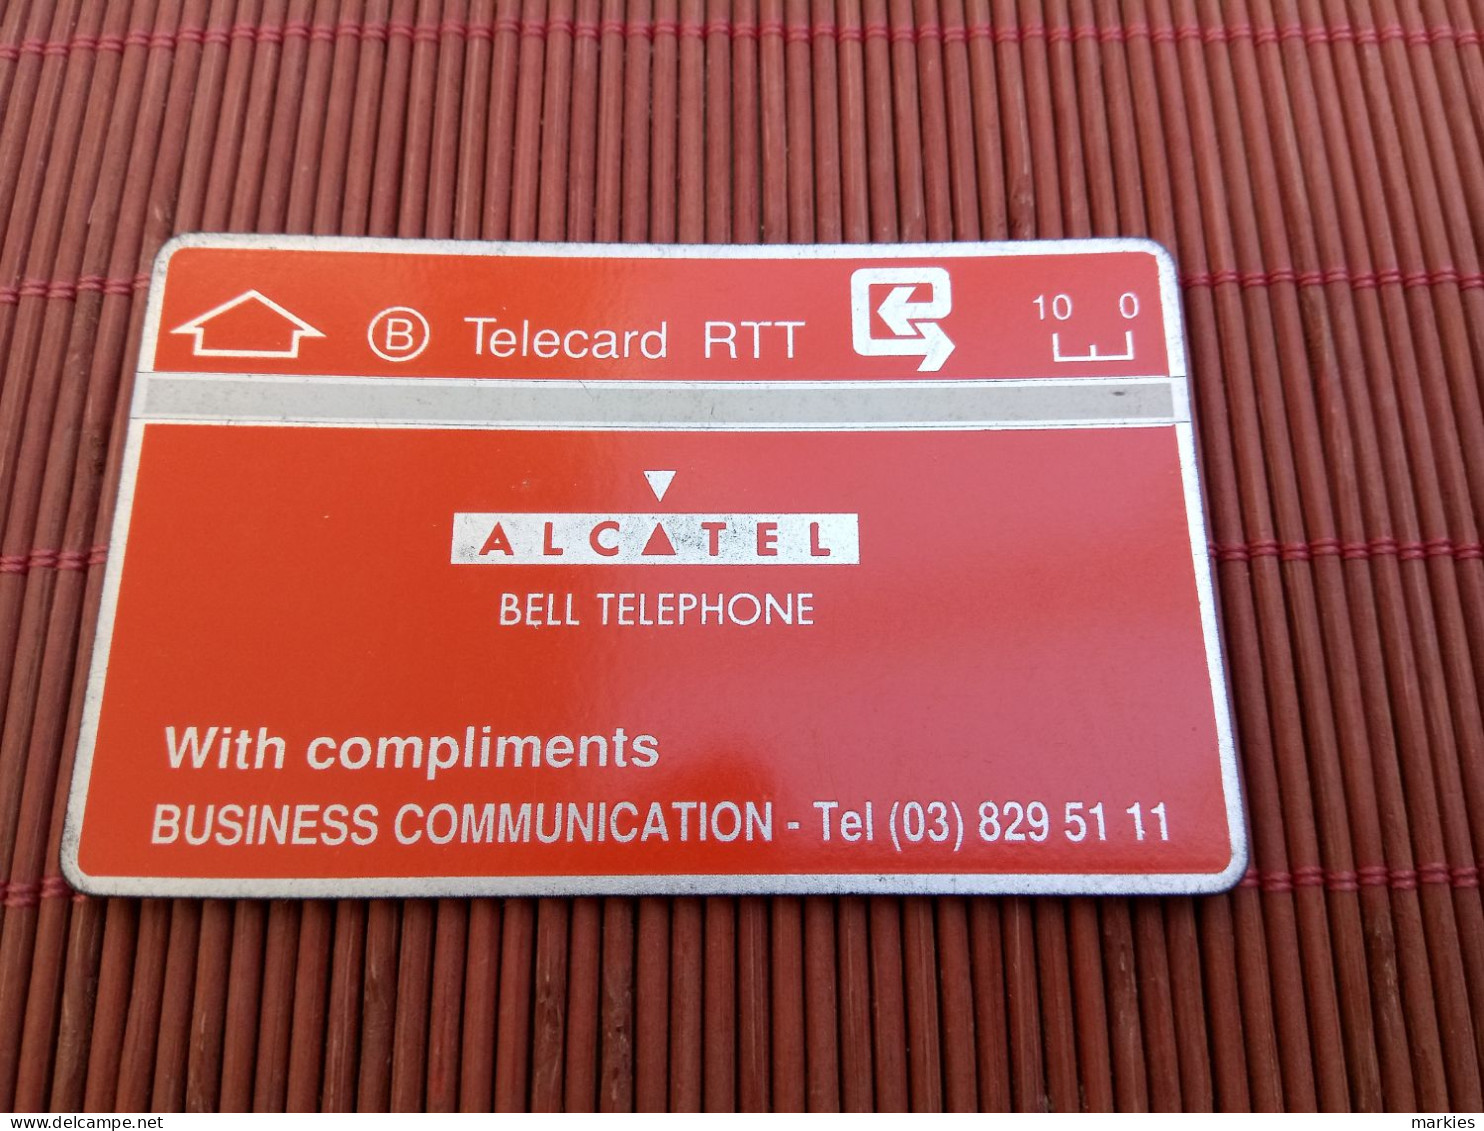 P 3 Alcatel Business Communications 804 B Used Catalogue 230 Euro Rare ! - [3] Tests & Services